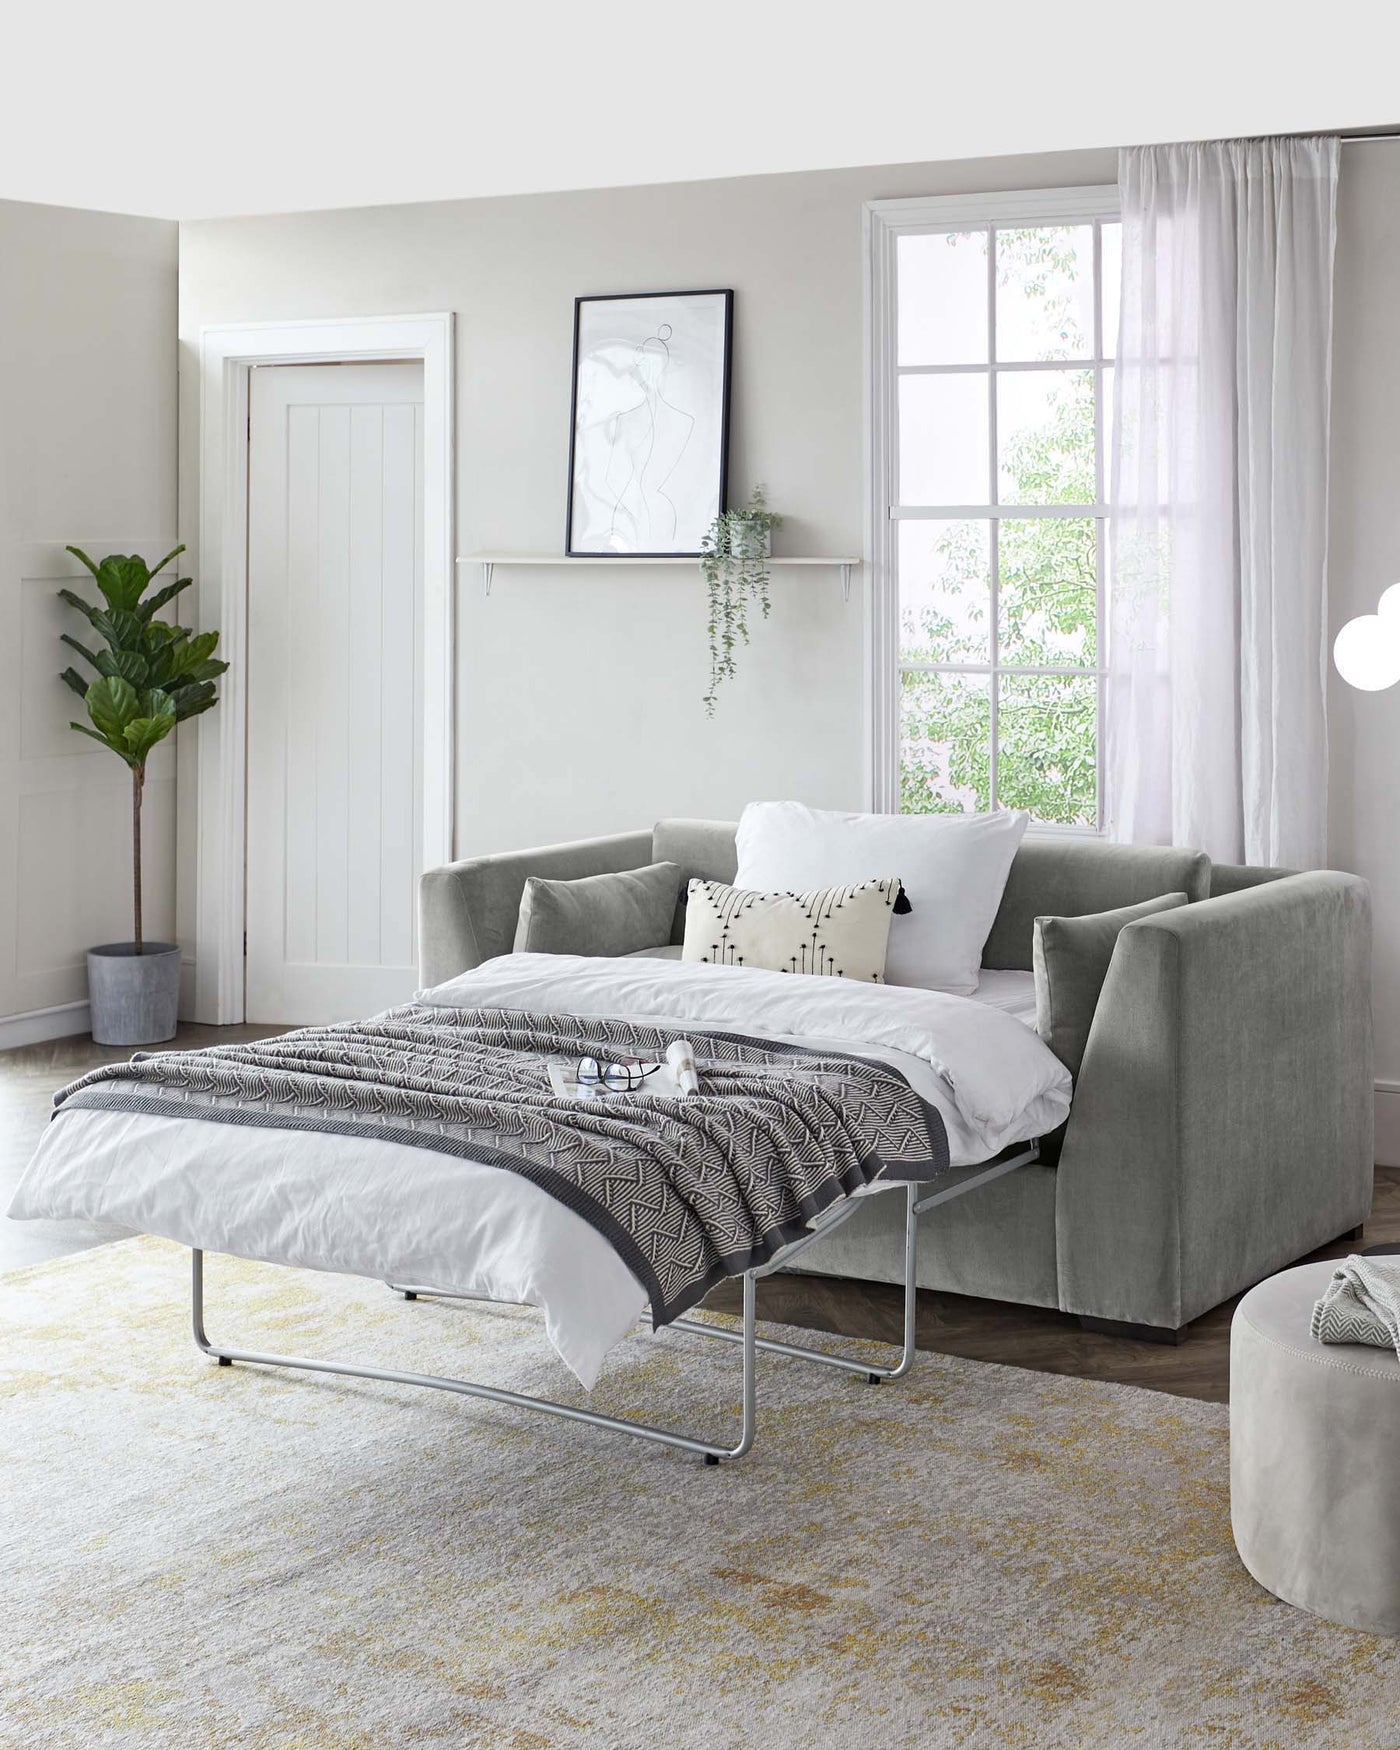 Modern bedroom with a sleek platform bed featuring a metal frame, accompanied by a plush light grey fabric upholstered armchair and matching ottoman. A simple white bedside tray table is placed on the bed, while a tall indoor plant adds a touch of greenery, creating a serene and contemporary living space.